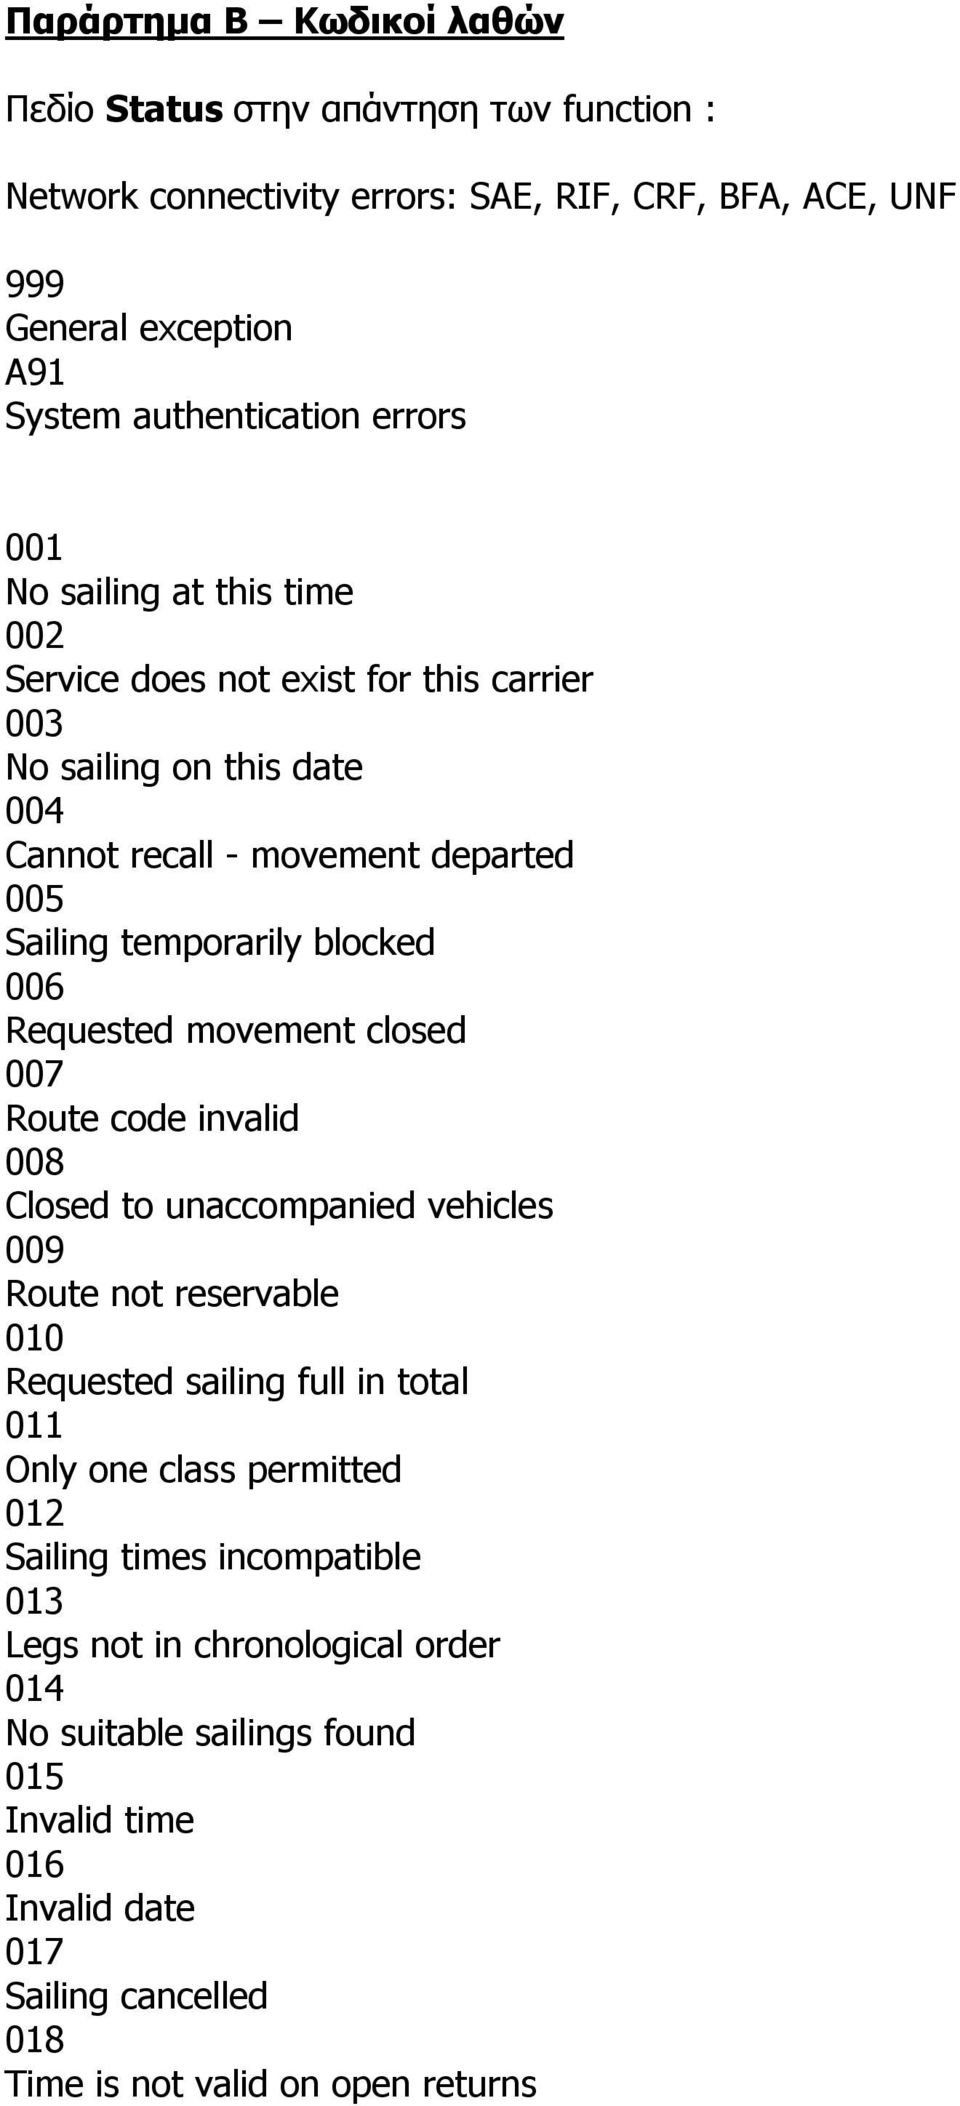 Requested movement closed 007 Route code invalid 008 Closed to unaccompanied vehicles 009 Route not reservable 010 Requested sailing full in total 011 Only one class permitted 012